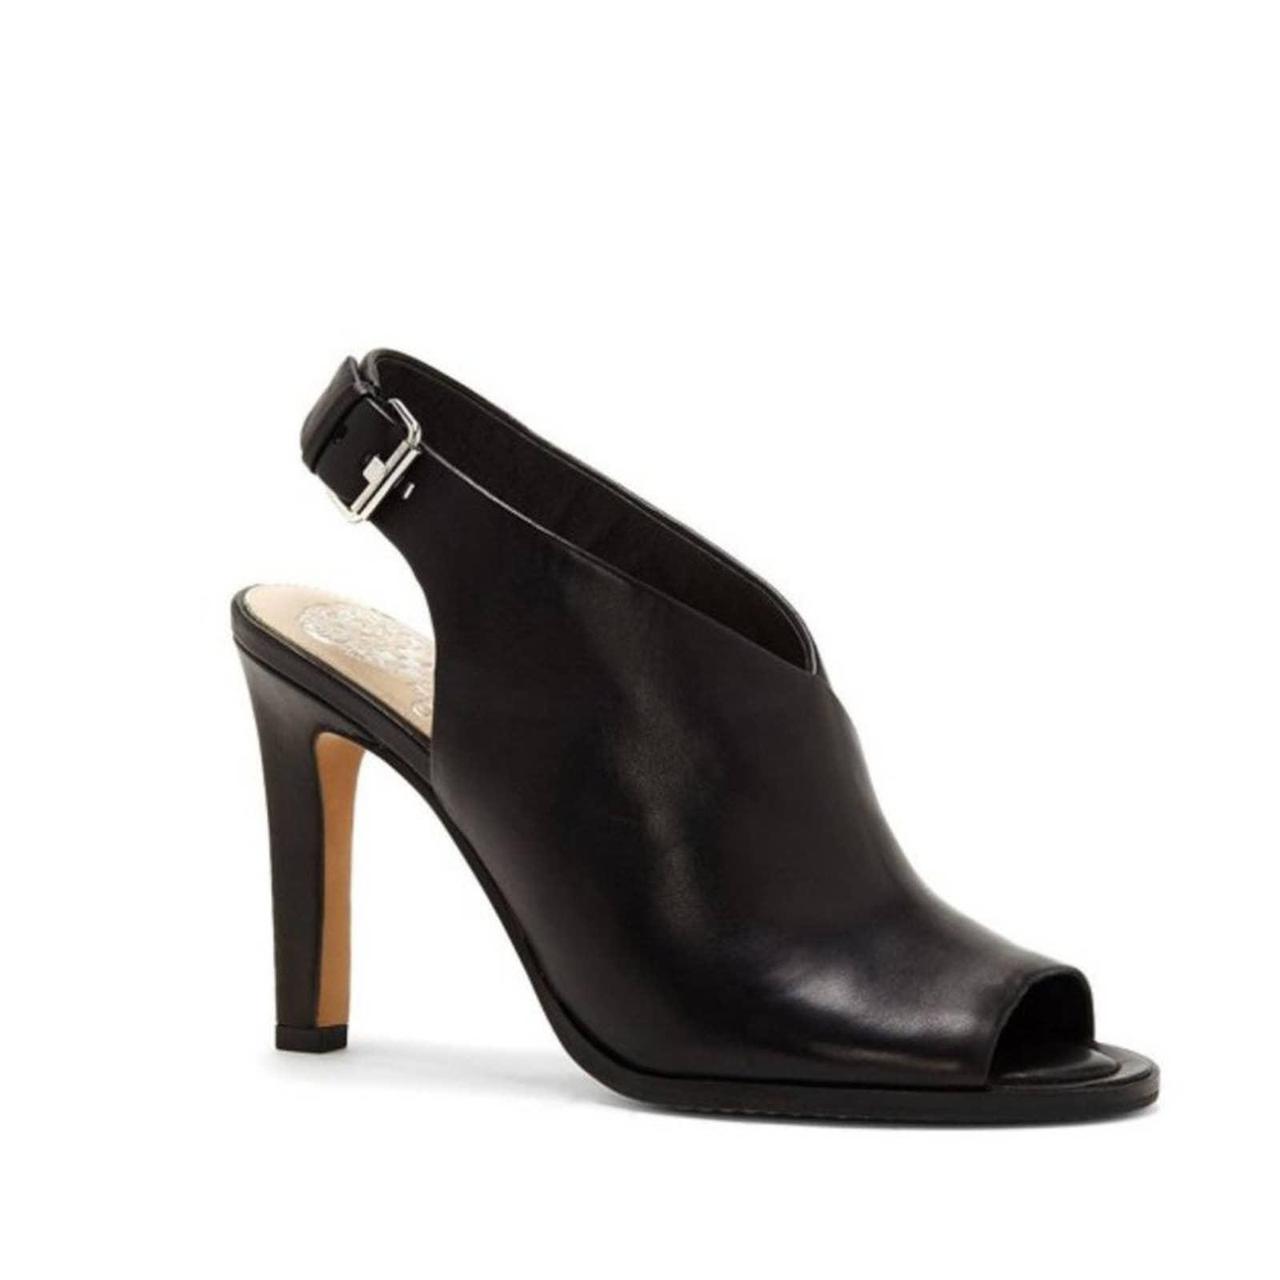 Vince Camuto Women's Black Courts